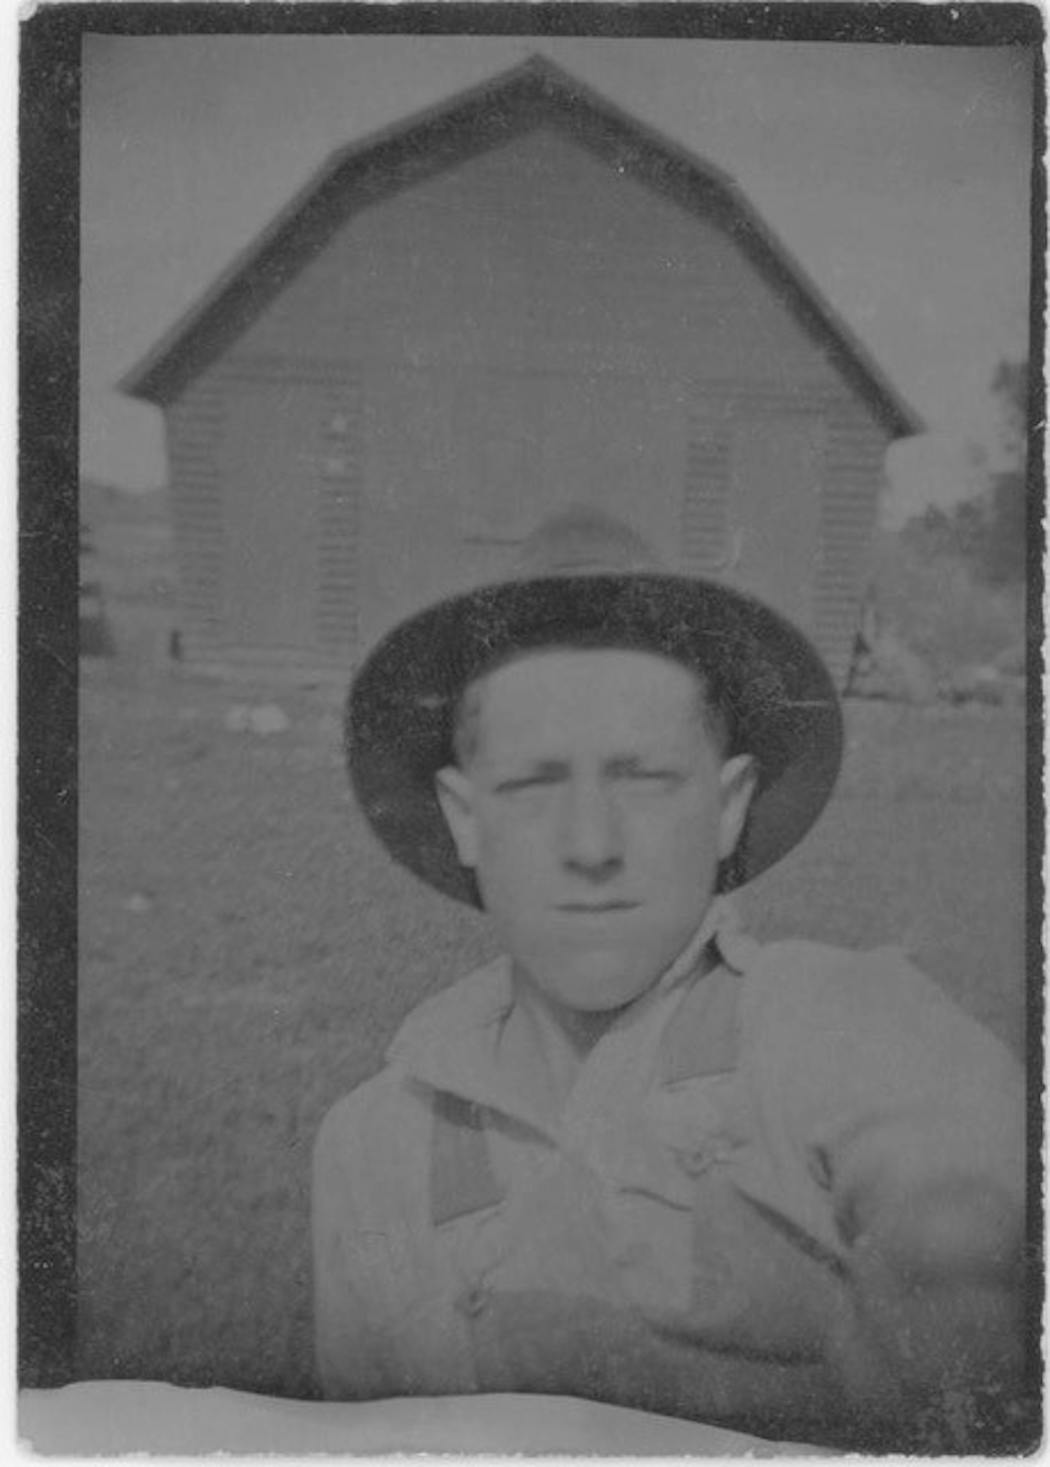 Howard Lake, Minn., farmer Emil Gabbert snapped an early selfie about 100 years ago in front of his barn.